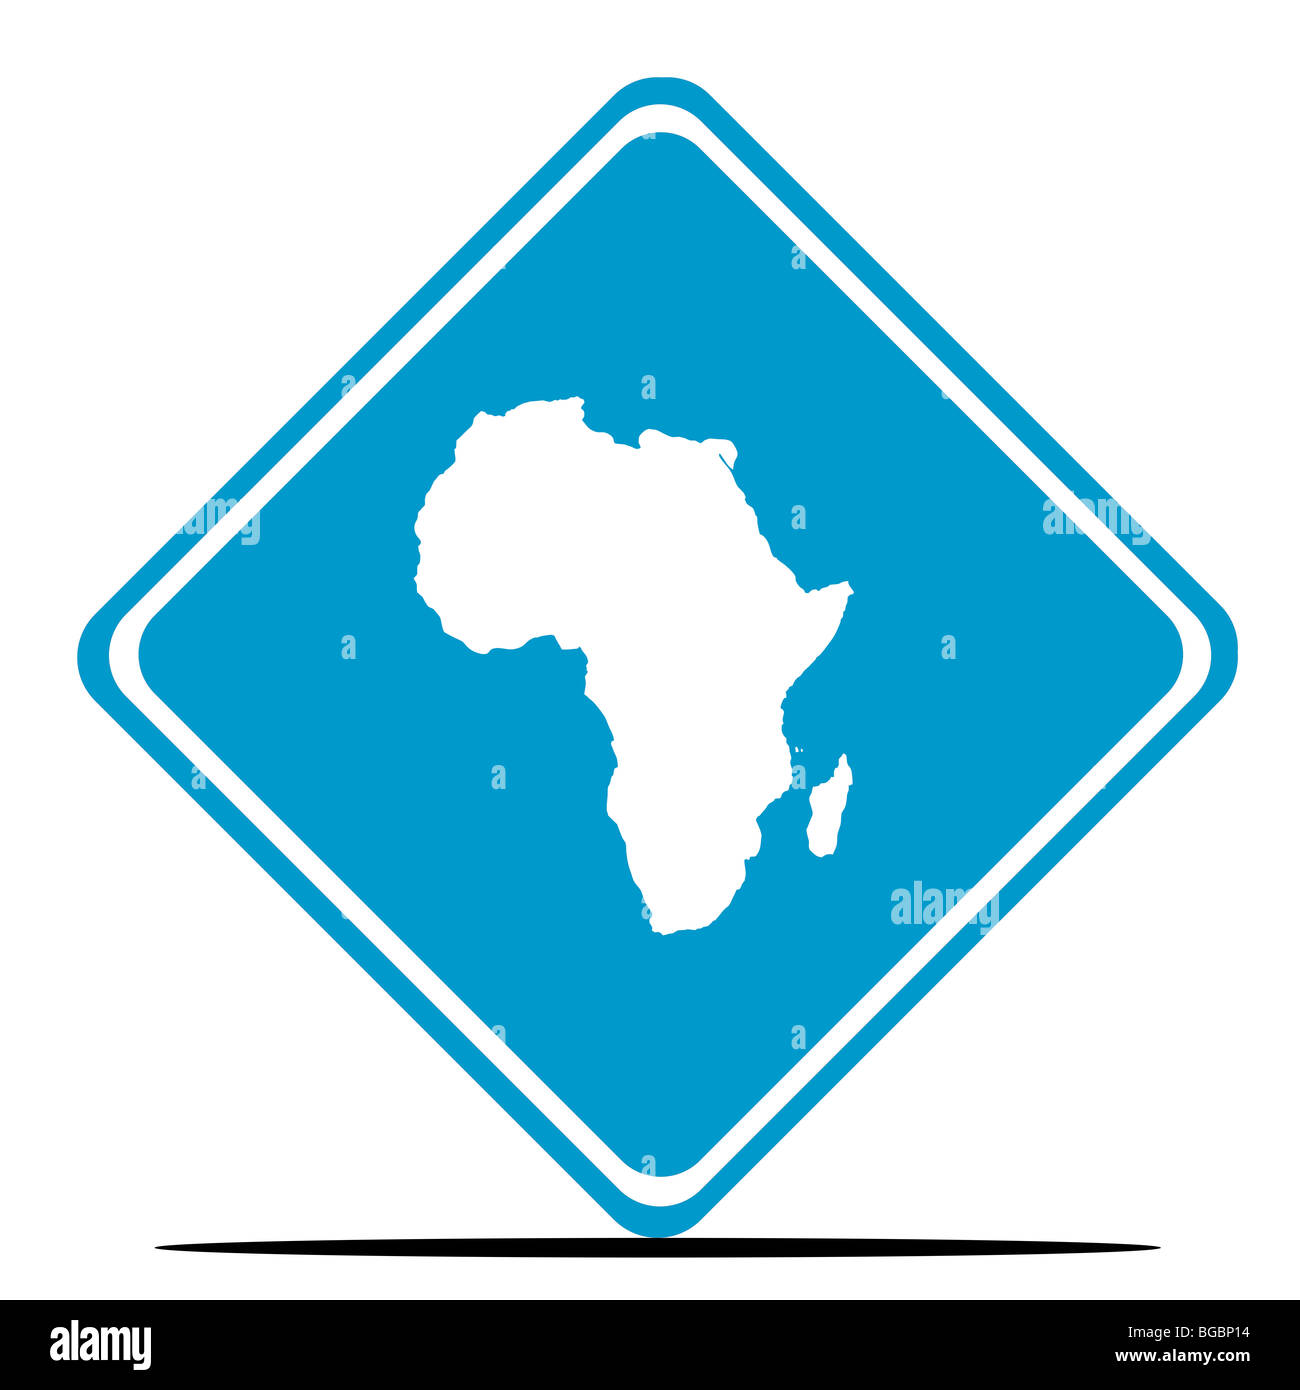 Africa continent road sign isolated on white background. Stock Photo